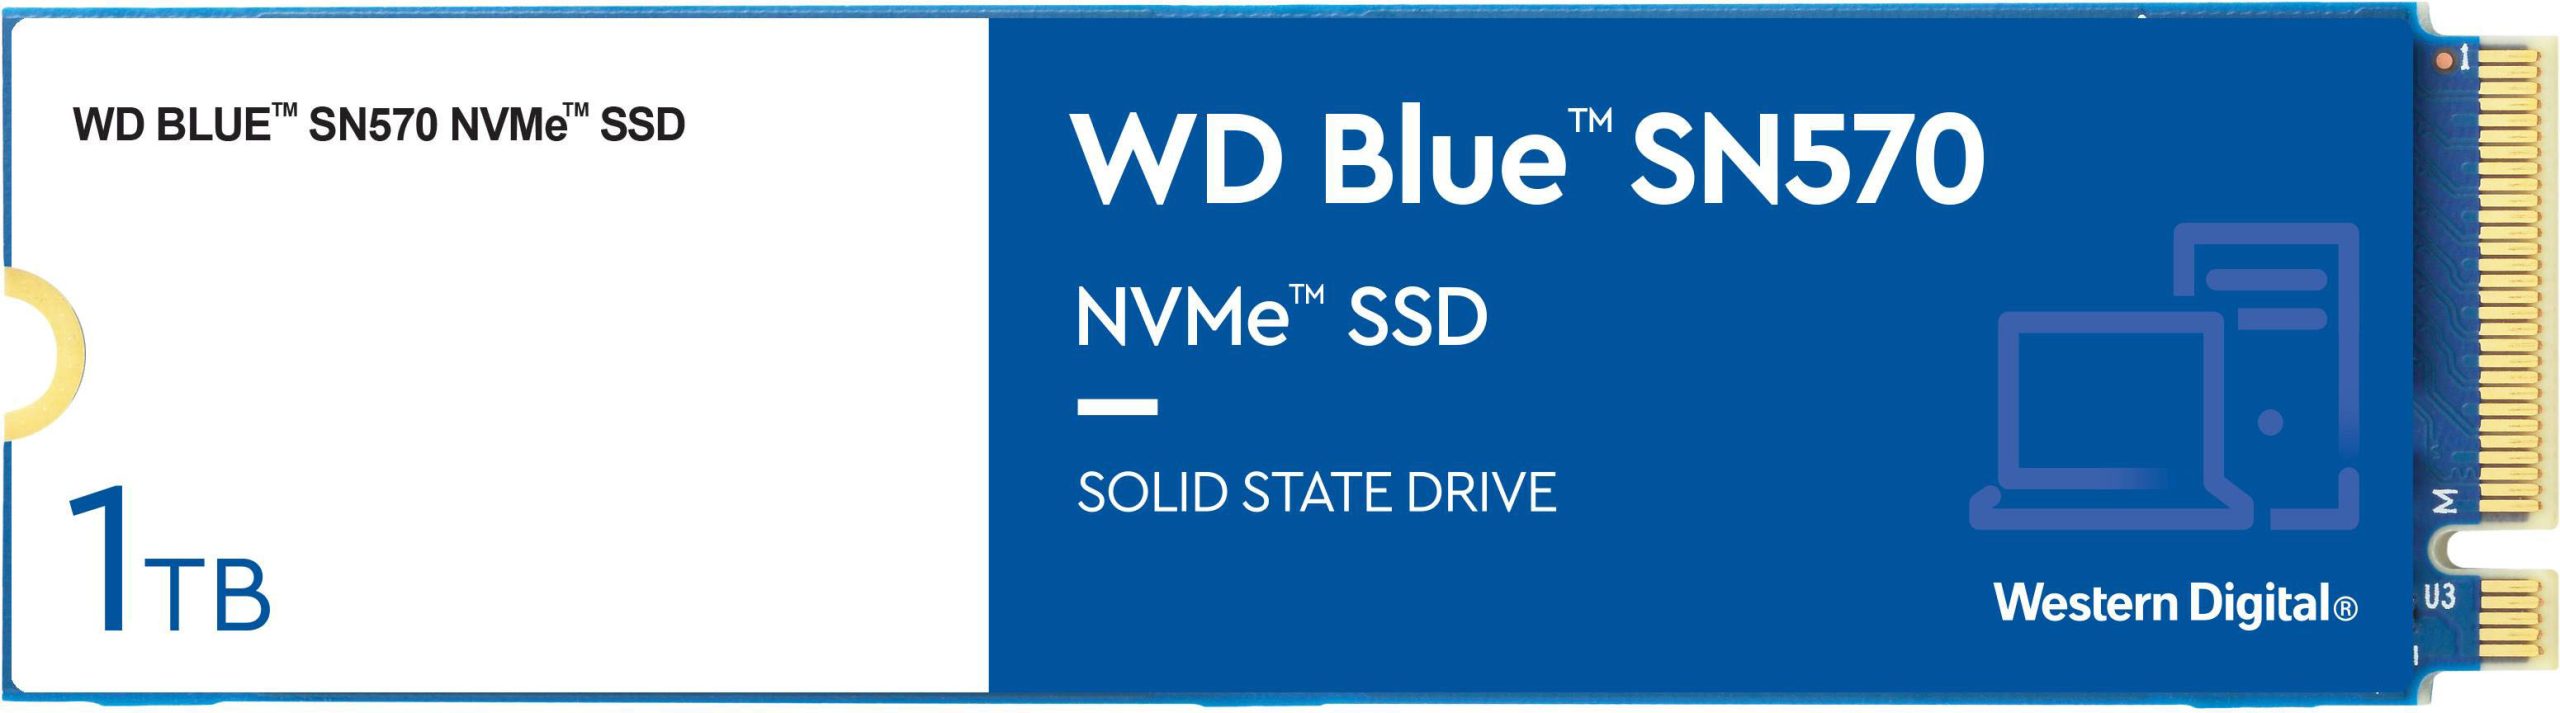 WD – Blue SN570 1TB Internal PCIe Gen3 x4 Solid State Drive for Laptops & Desktops – Just $60.99 at Best Buy